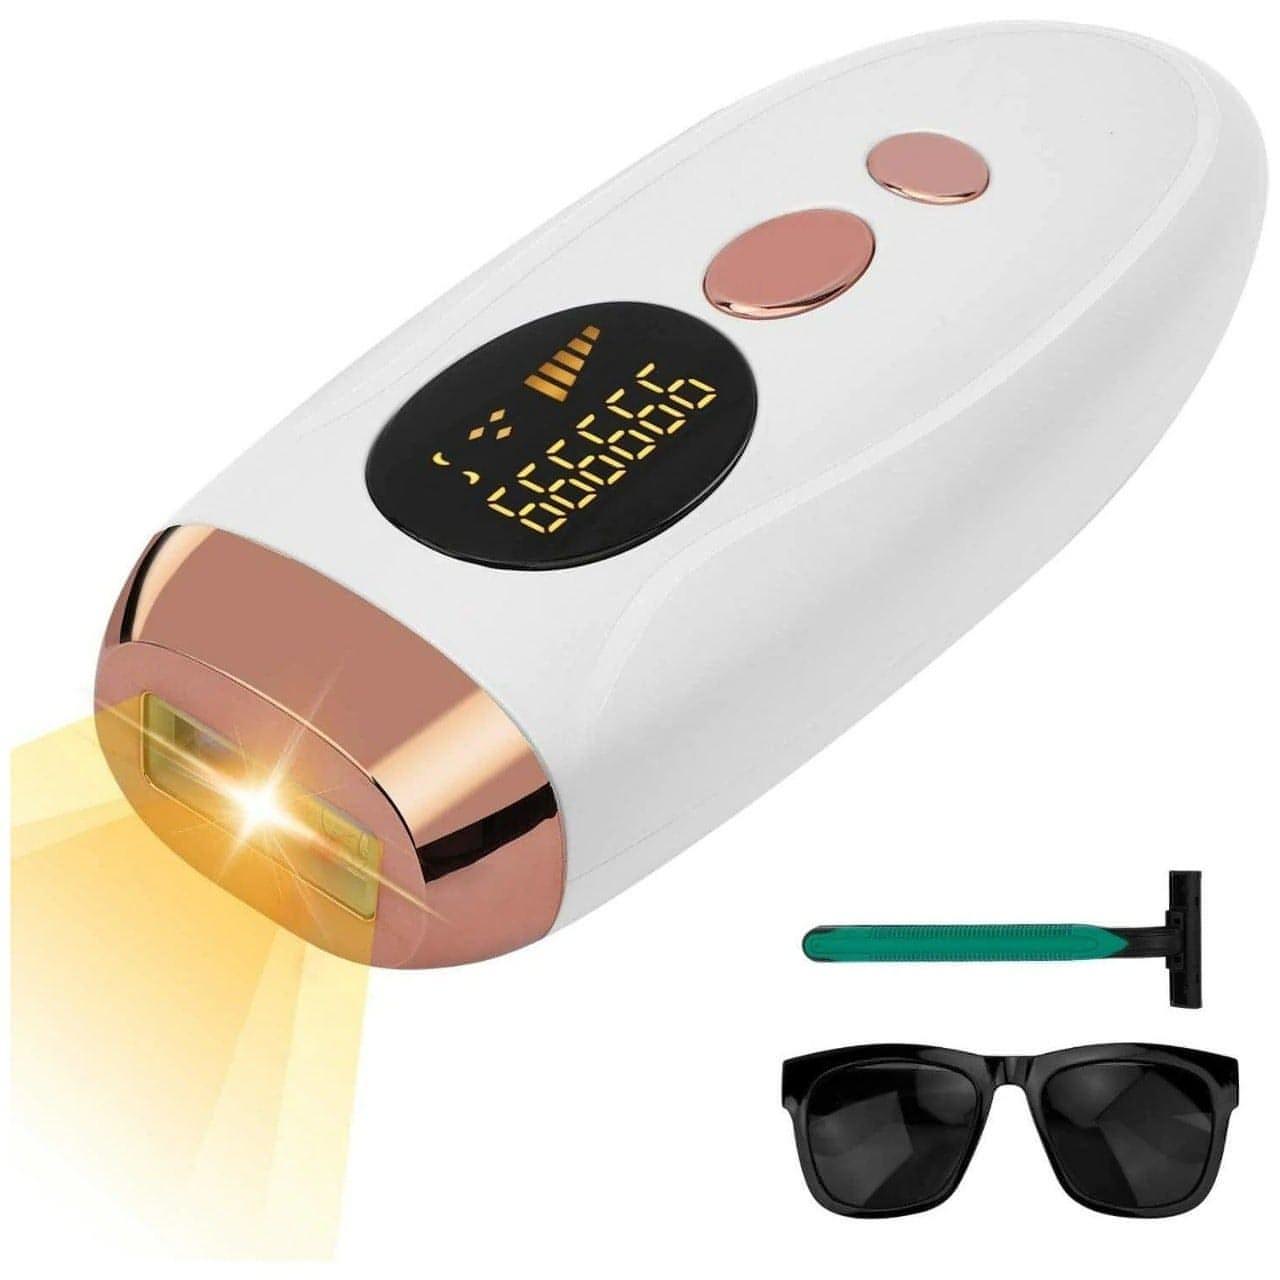 IPL Laser Hair Removal Device, Permanent Hair Remover On Face, Legs, Arms,  Armpits, Whole Body